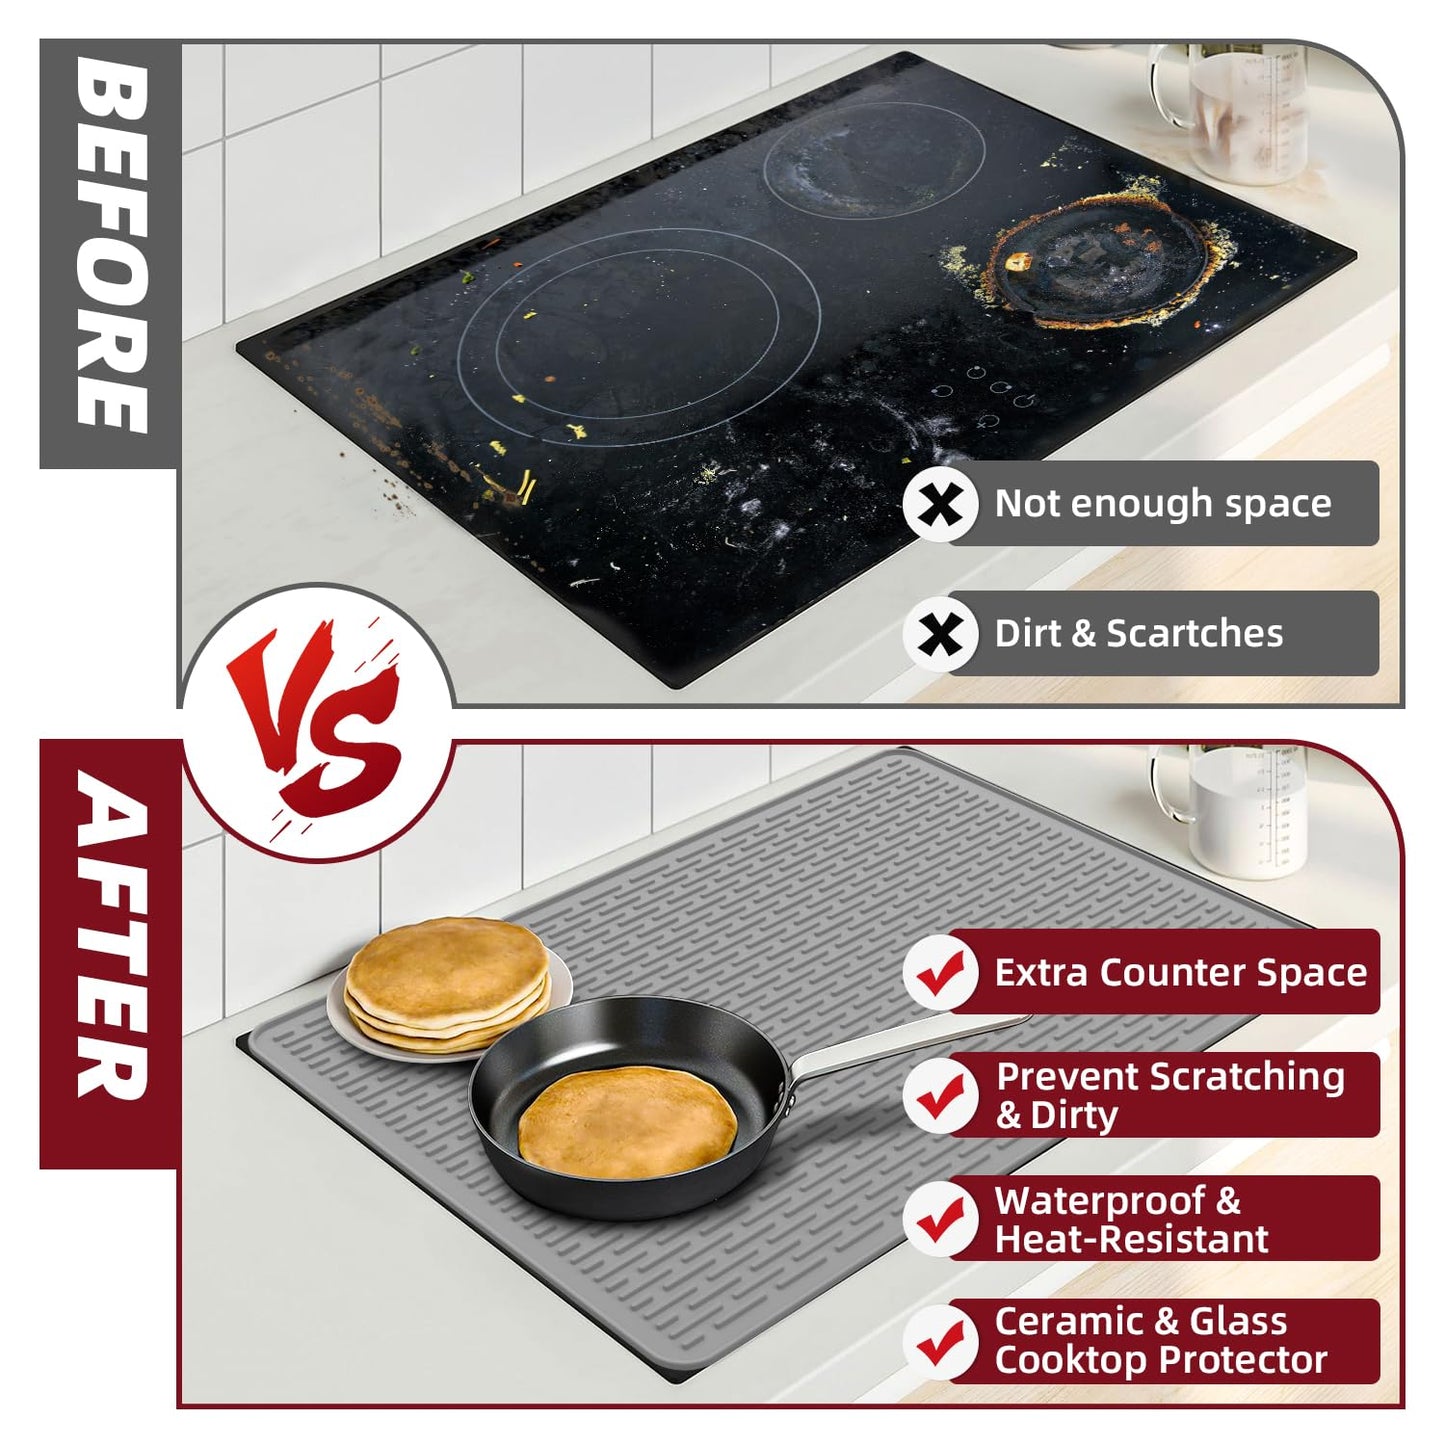 LOPNUR Silicone Electric Stove Cover for Stove Top, 28"x20" Glass Top Stove Cover Protector for Electric Stove, Induction Cooktop Protector Mat, Non-Slip Heat Resistant Oven Top Cover